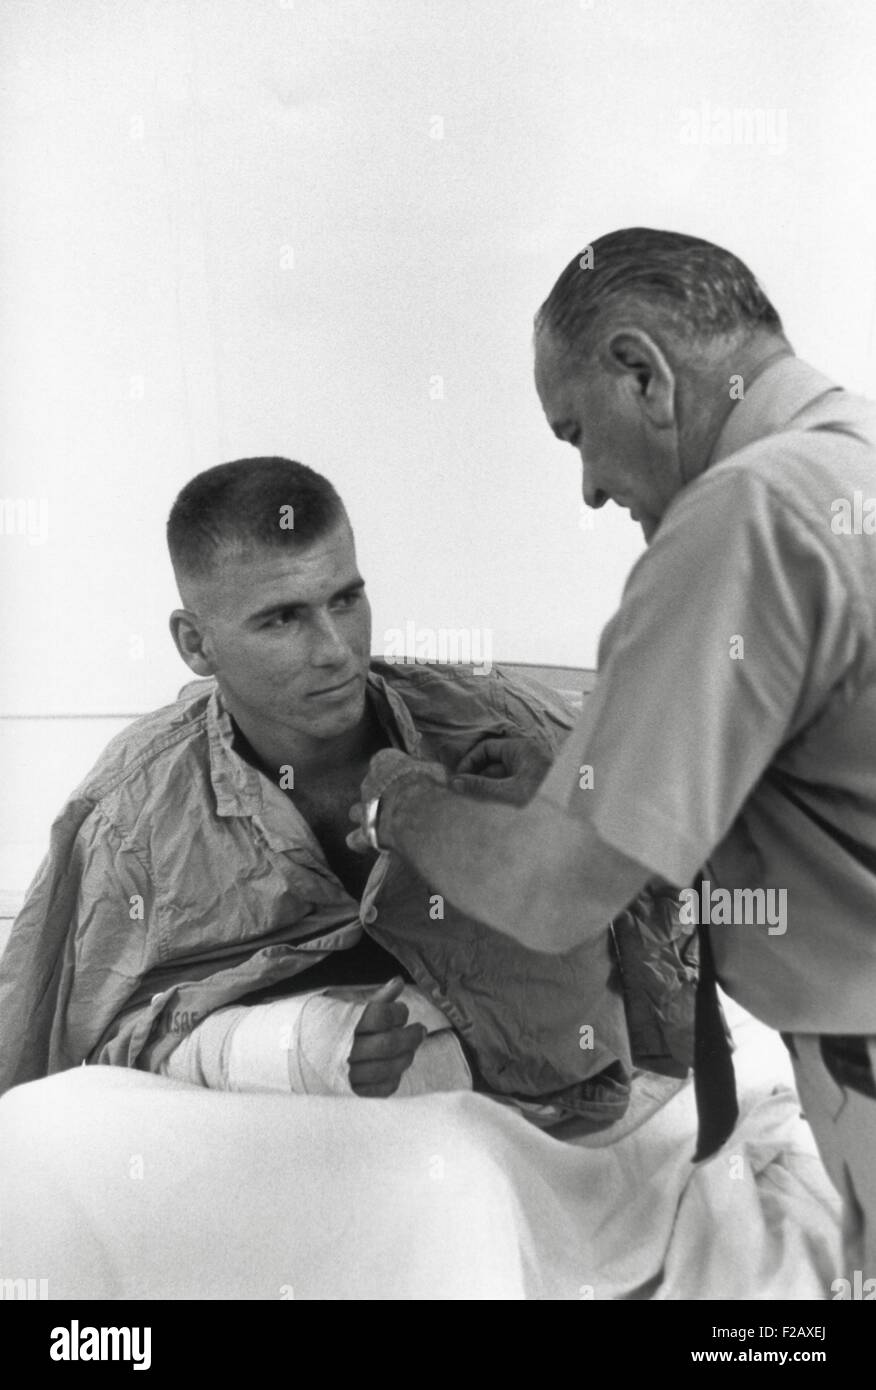 President Lyndon Johnson awards a medal to a wounded U.S. serviceman. Cam Rahn Bay, South Vietnam. Oct. 26, 1966. (BSLOC 2015 2 216) Stock Photo